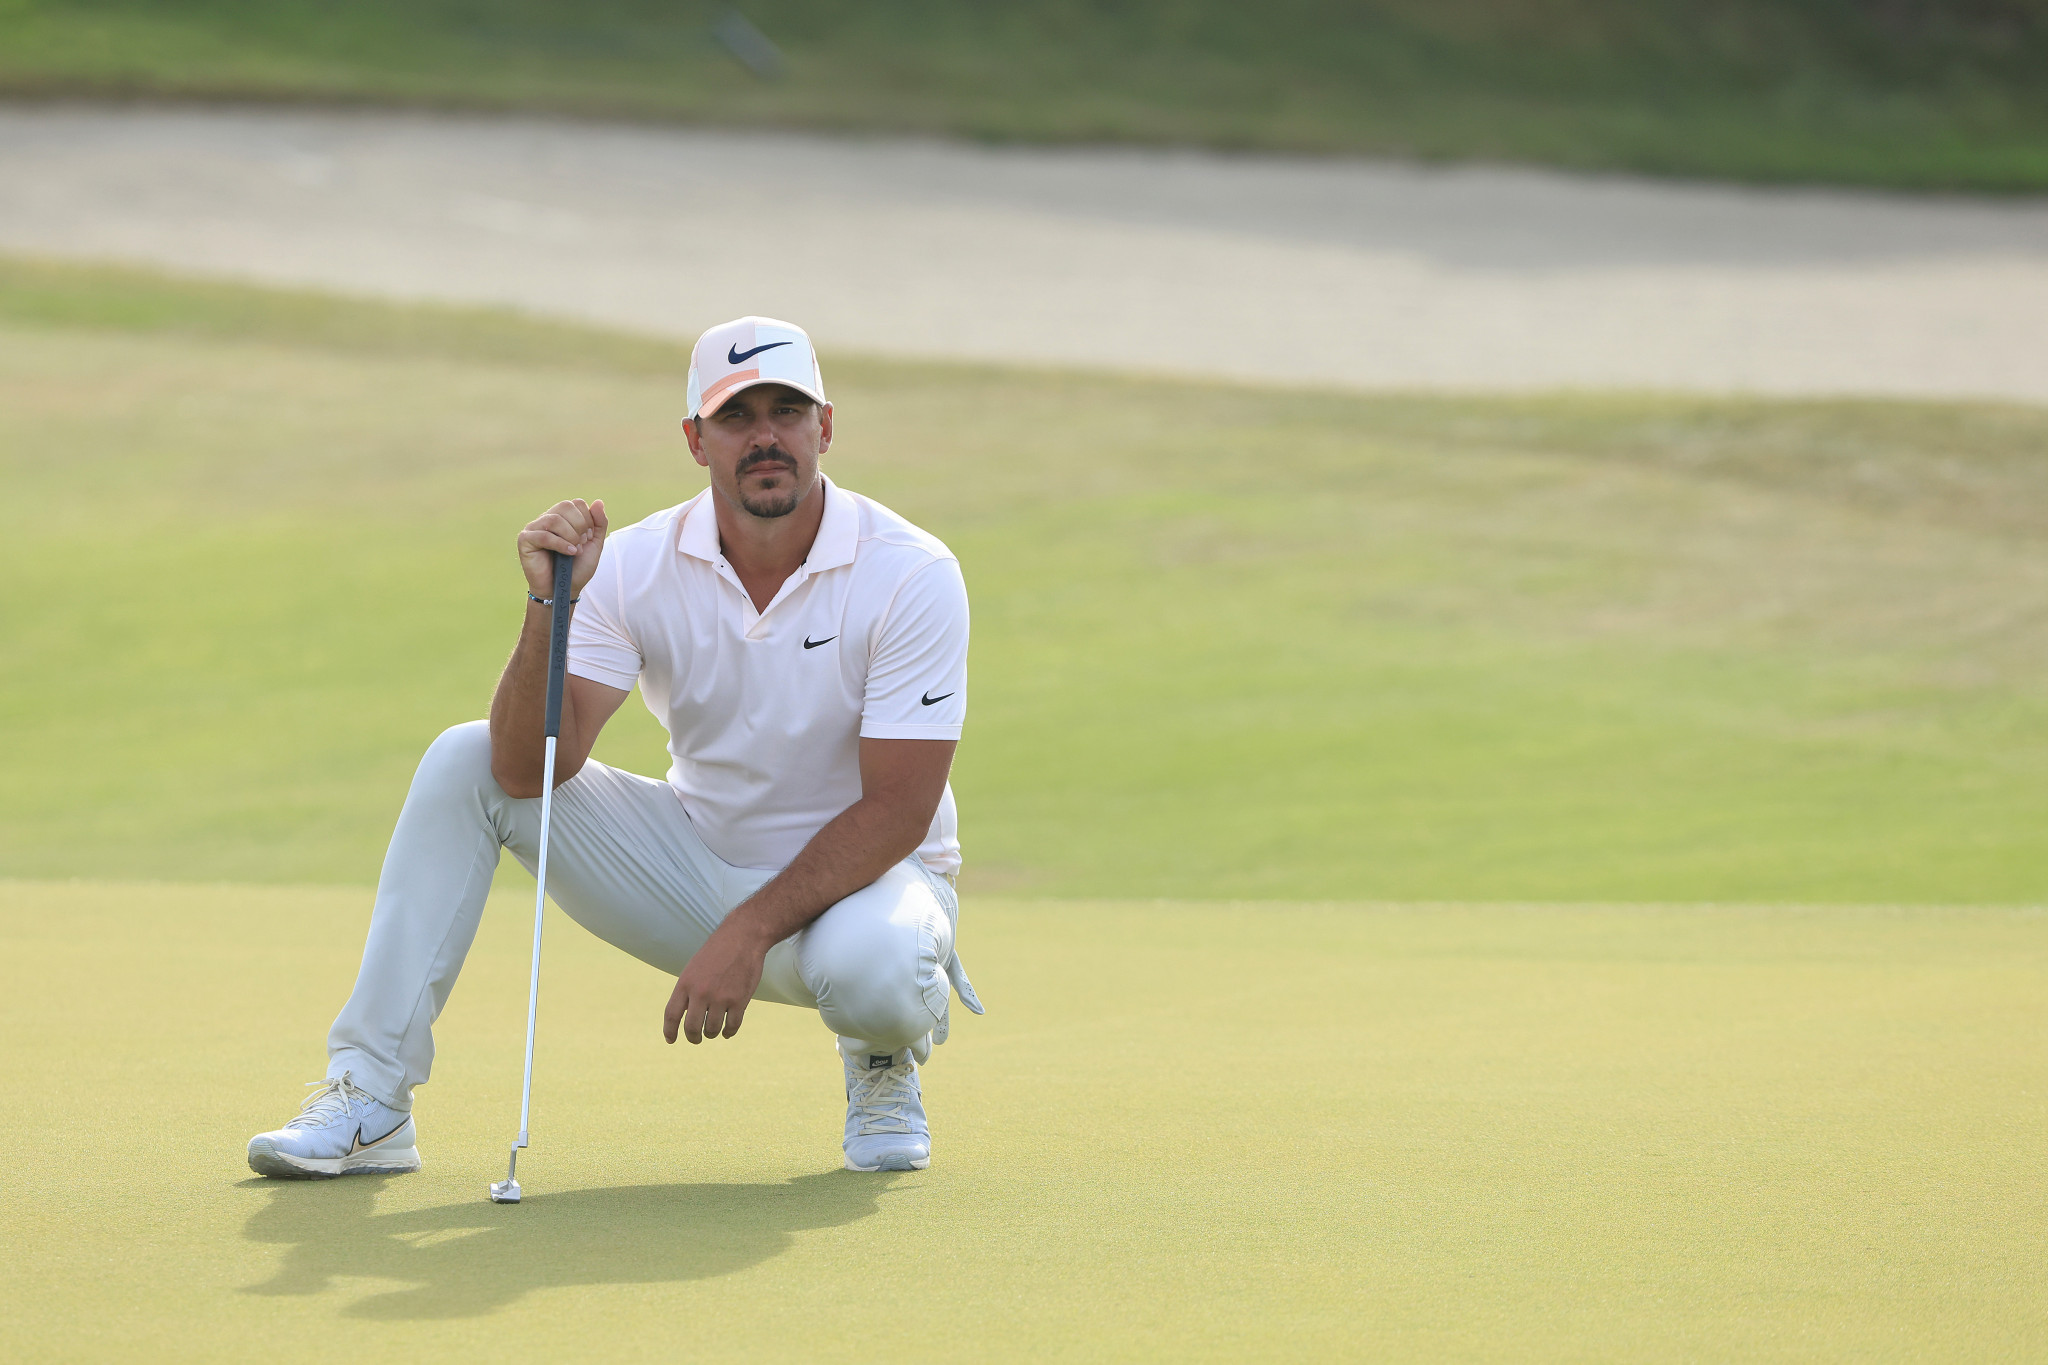 Two-time PGA Championship winner Brooks Koepka is one shot off the lead ©Getty Images